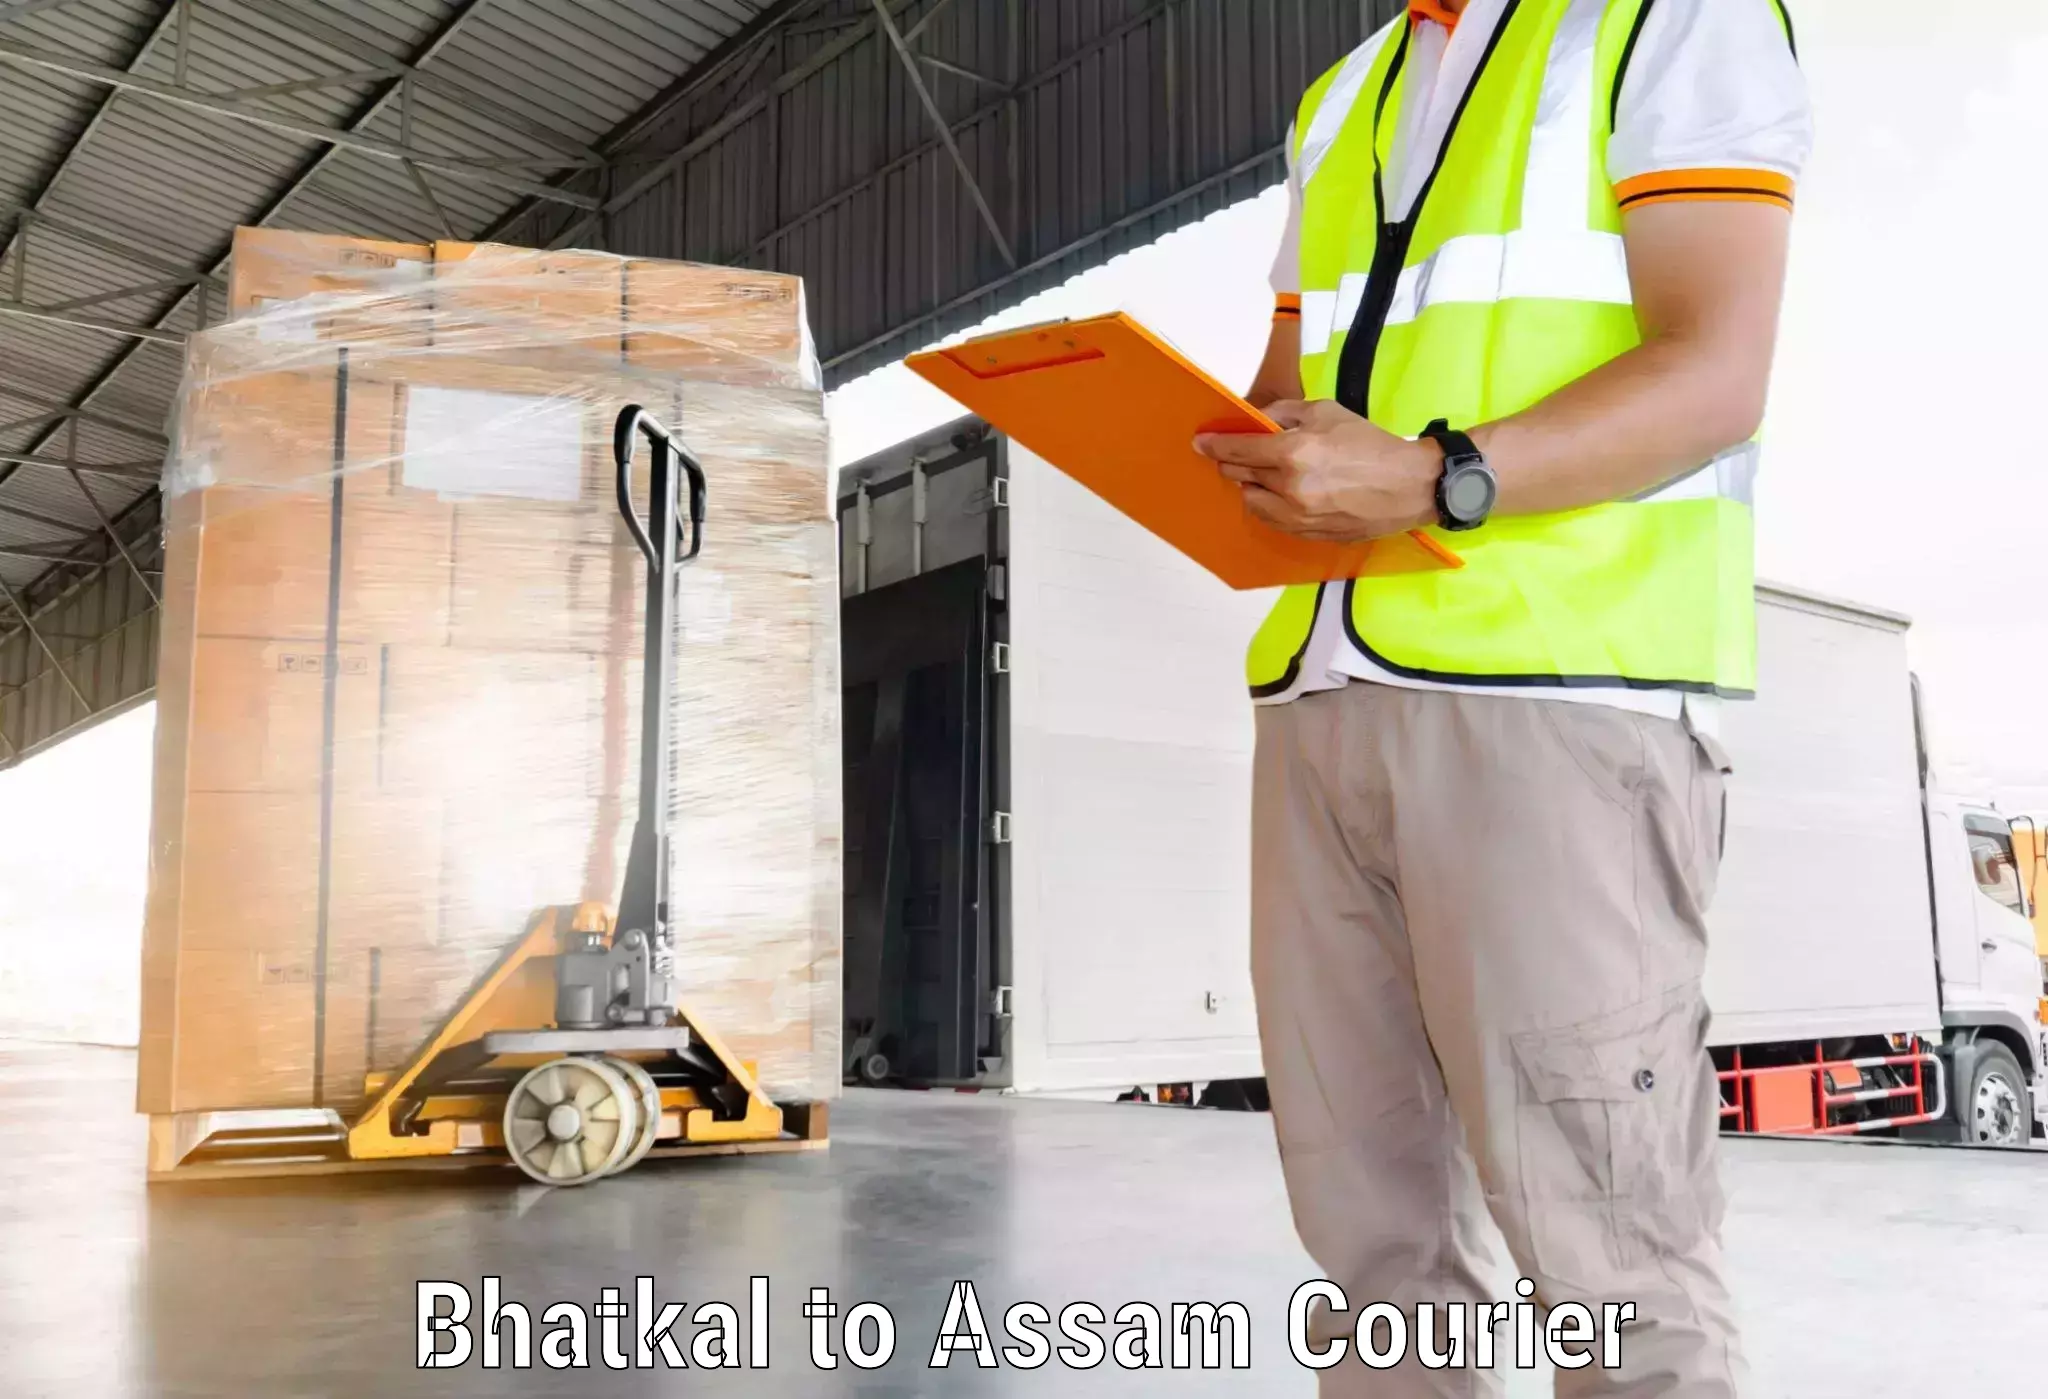 Modern delivery methods Bhatkal to Sonitpur